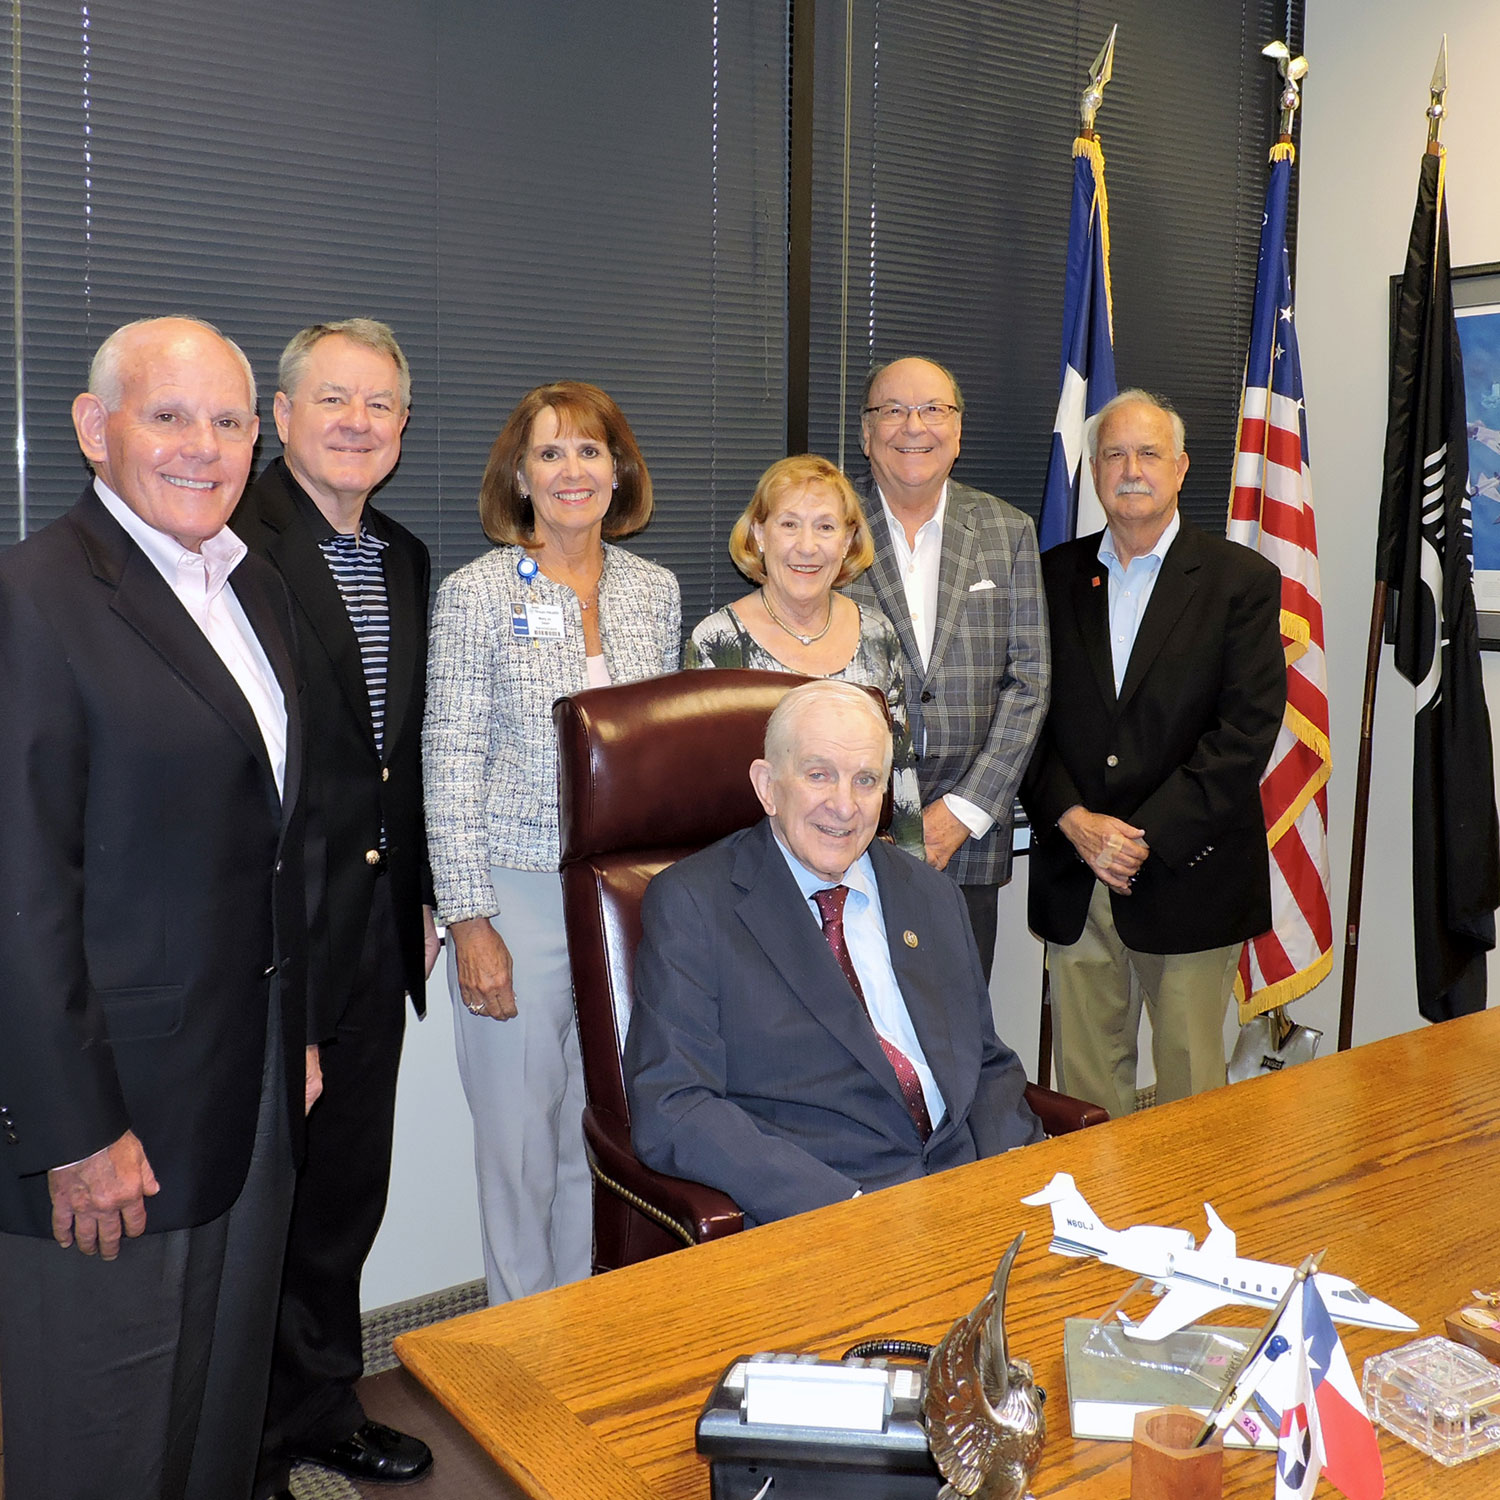 David McCall III (second from right) with other Plano Citizen of the Year honorees // courtesy Plano Chamber of Commerce